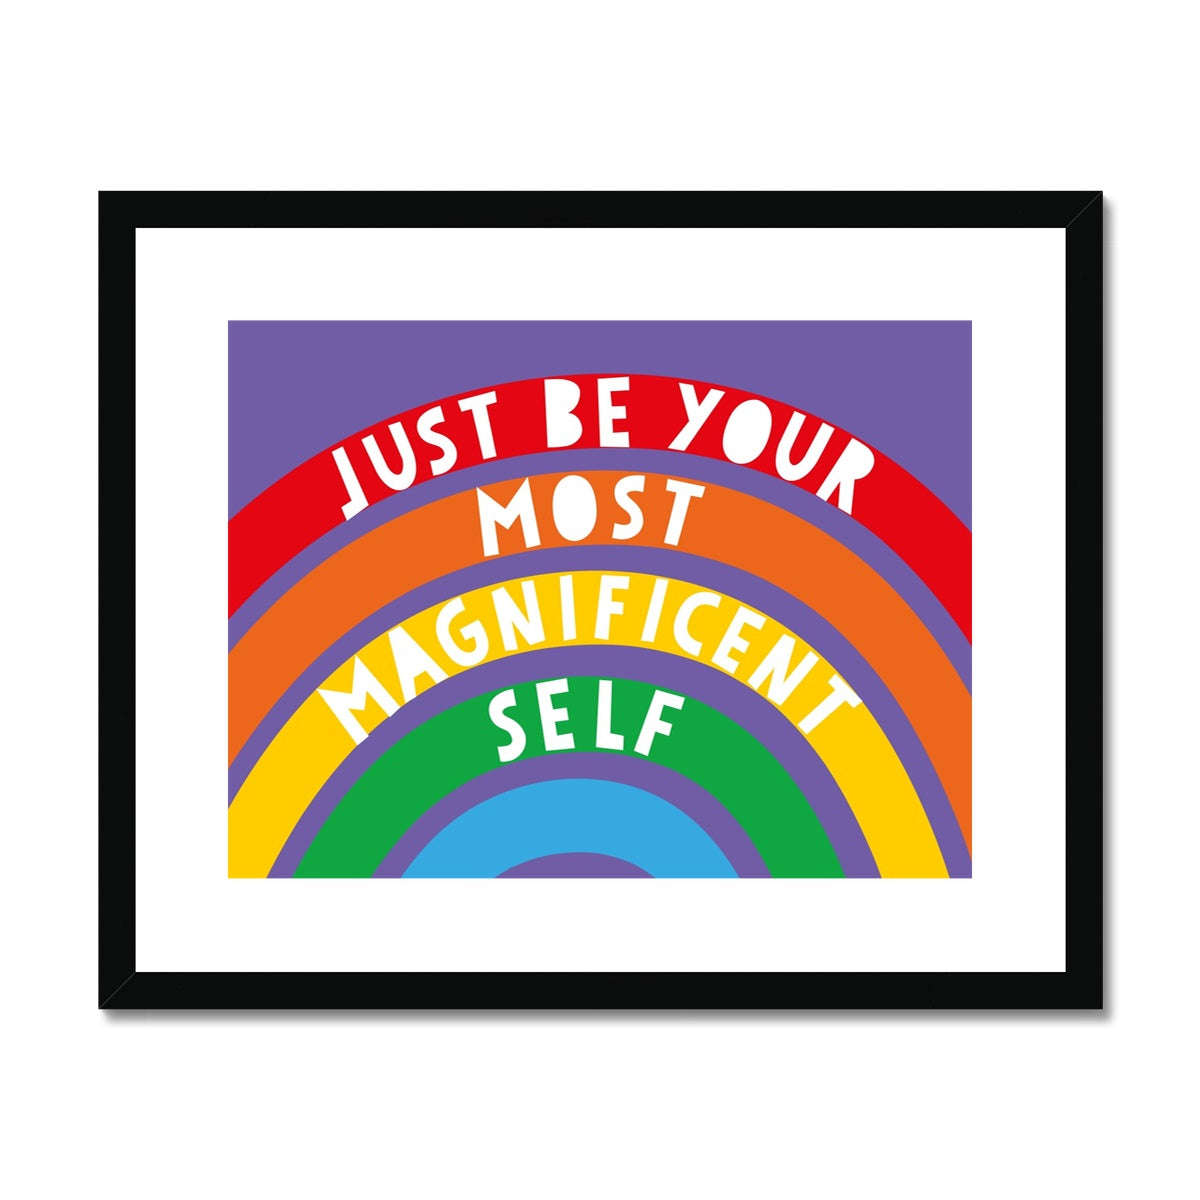 Just Be Your Most Magnificent Self Framed & Mounted Print